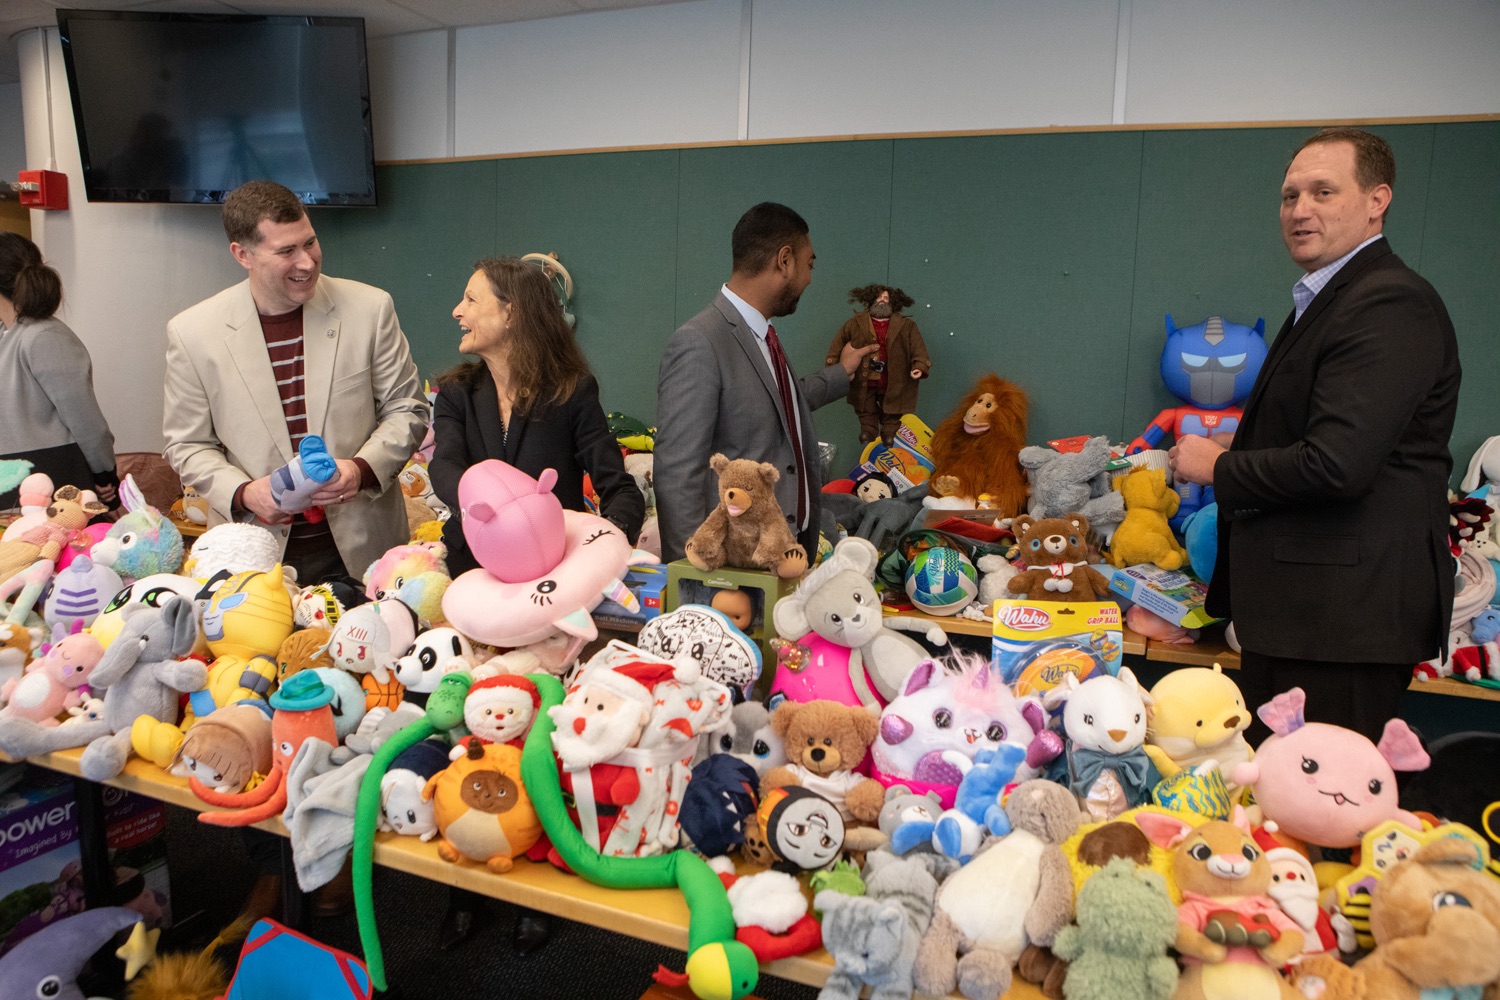 The Pennsylvania Departments of Labor & Industry (L&I) and Human Services (DHS) kicked off the 2023 holiday season Wednesday with an annual donation of stuffed toys collected throughout the year by L&I during routine safety inspections. The toys will be distributed to Pennsylvania families through DHS Holiday Wish program. . ."We inspect these stuffed toys throughout the year to ensure their safety for all children in Pennsylvania. Its become a tradition at L&I to donate the inspected toys to the Holiday Wish program because we get to brighten the holidays for a few children while reminding parents and retailers of the importance of toy safety, L&I Secretary Nancy A. Walker. I encourage any Pennsylvanian who can give a little extra this year to consider donating to a holiday charity. The joy and happiness through a simple act of kindness can lead to lifelong memories for countless Pennsylvania children.<br><a href="https://filesource.amperwave.net/commonwealthofpa/photo/24018_LI_StuffedToys_ERD_001.jpg" target="_blank">⇣ Download Photo</a>